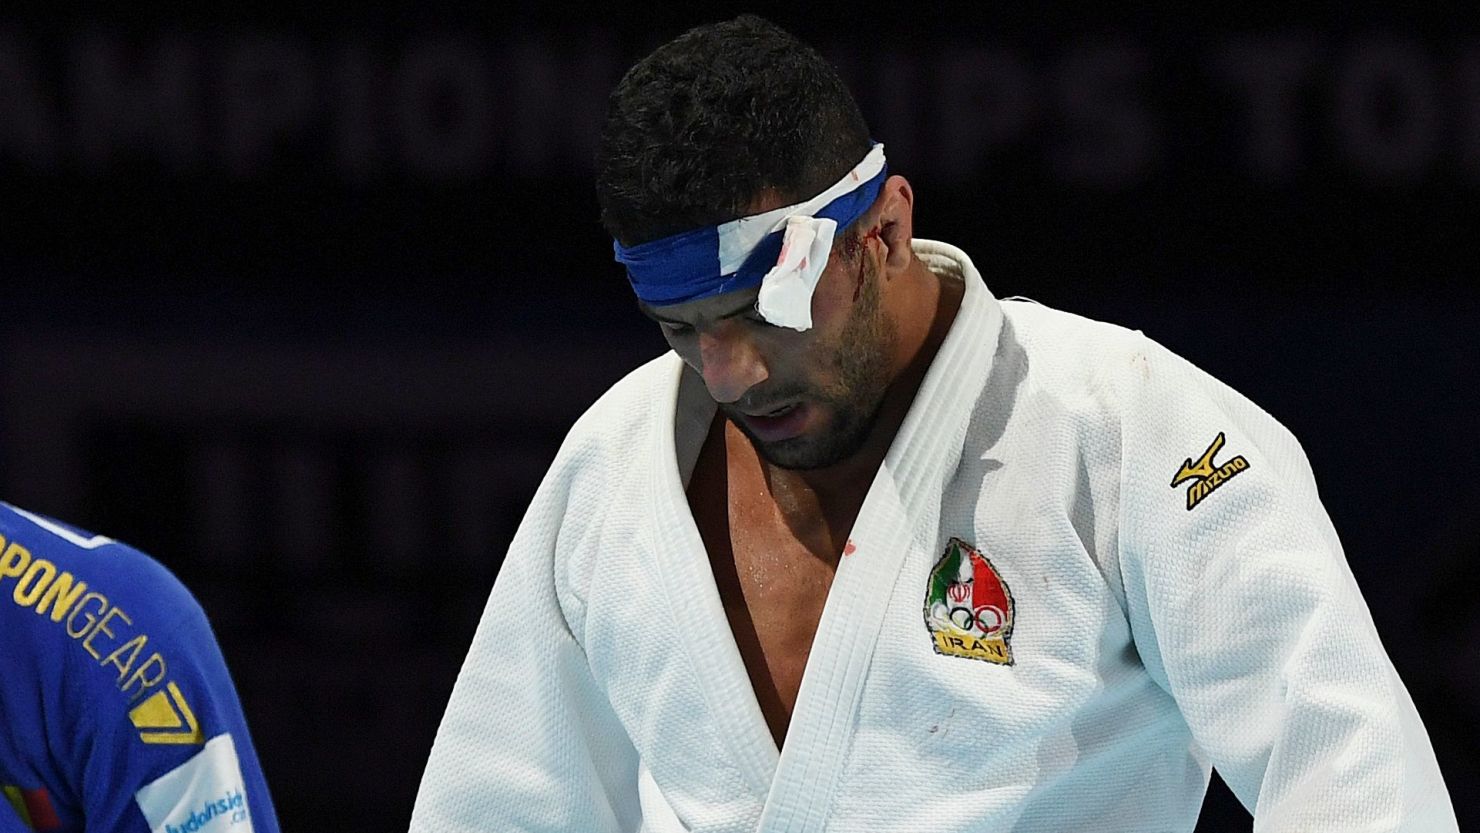 Saeid Mollaei following his loss against Belgium's Matthias Casse during the semifinal of the men's under 81kg category at the 2019 Judo World Championships.